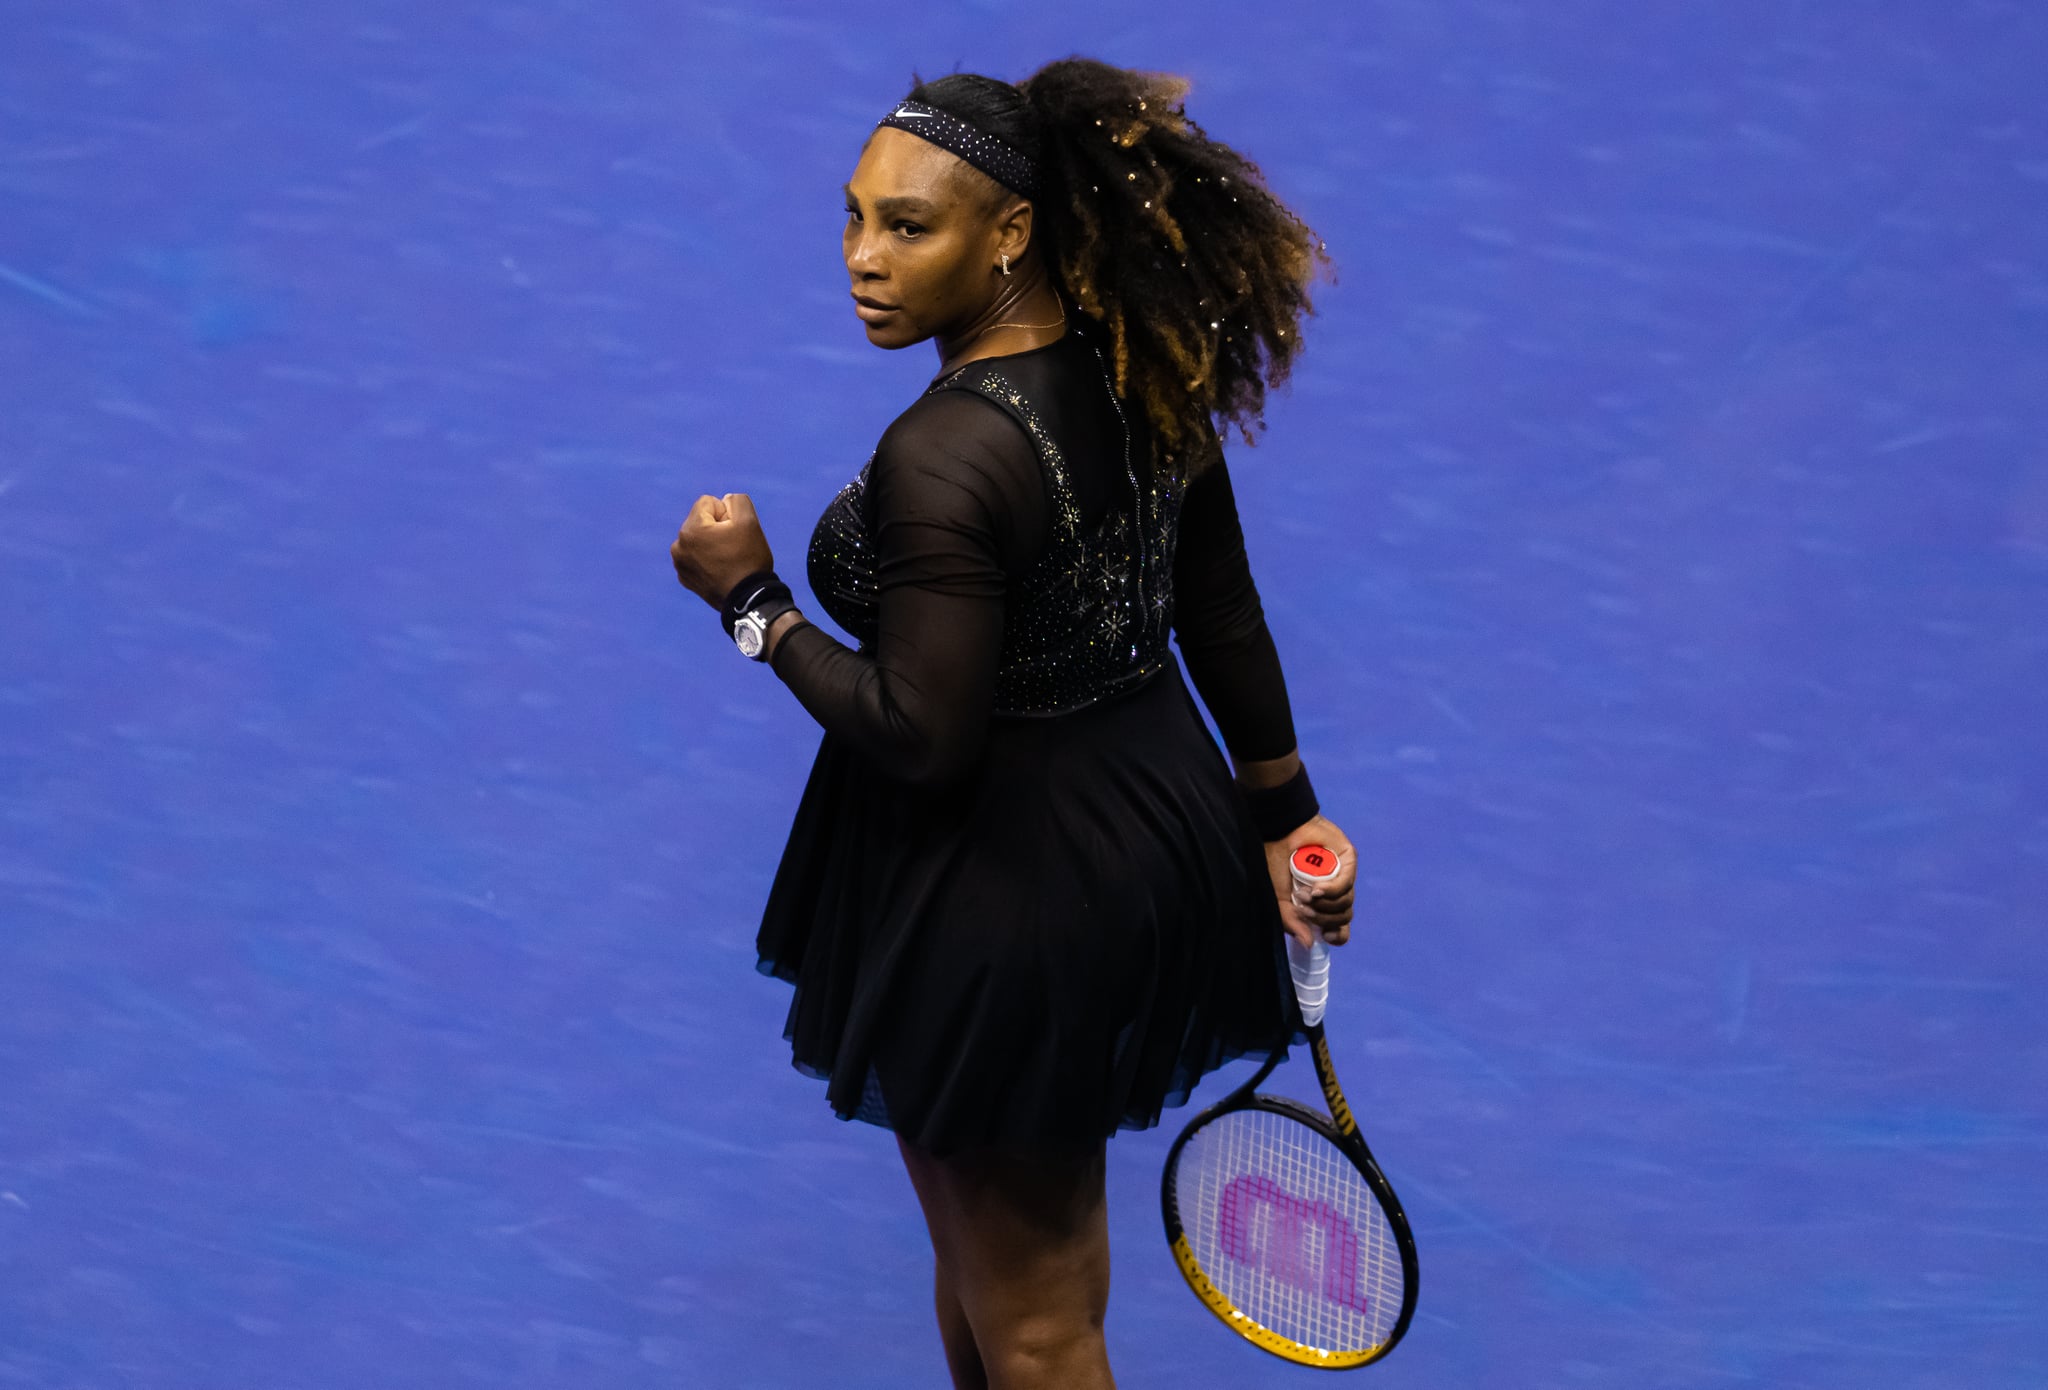 NEW YORK, NEW YORK - AUGUST 31: Serena Williams of the United States celebrates winning a point against Anett Kontaveit of Estonia during her second round match on Day 3 of the US Open Tennis Championships at USTA Billie Jean King National Tennis Center on August 31, 2022 in New York City (Photo by Robert Prange/Getty Images)